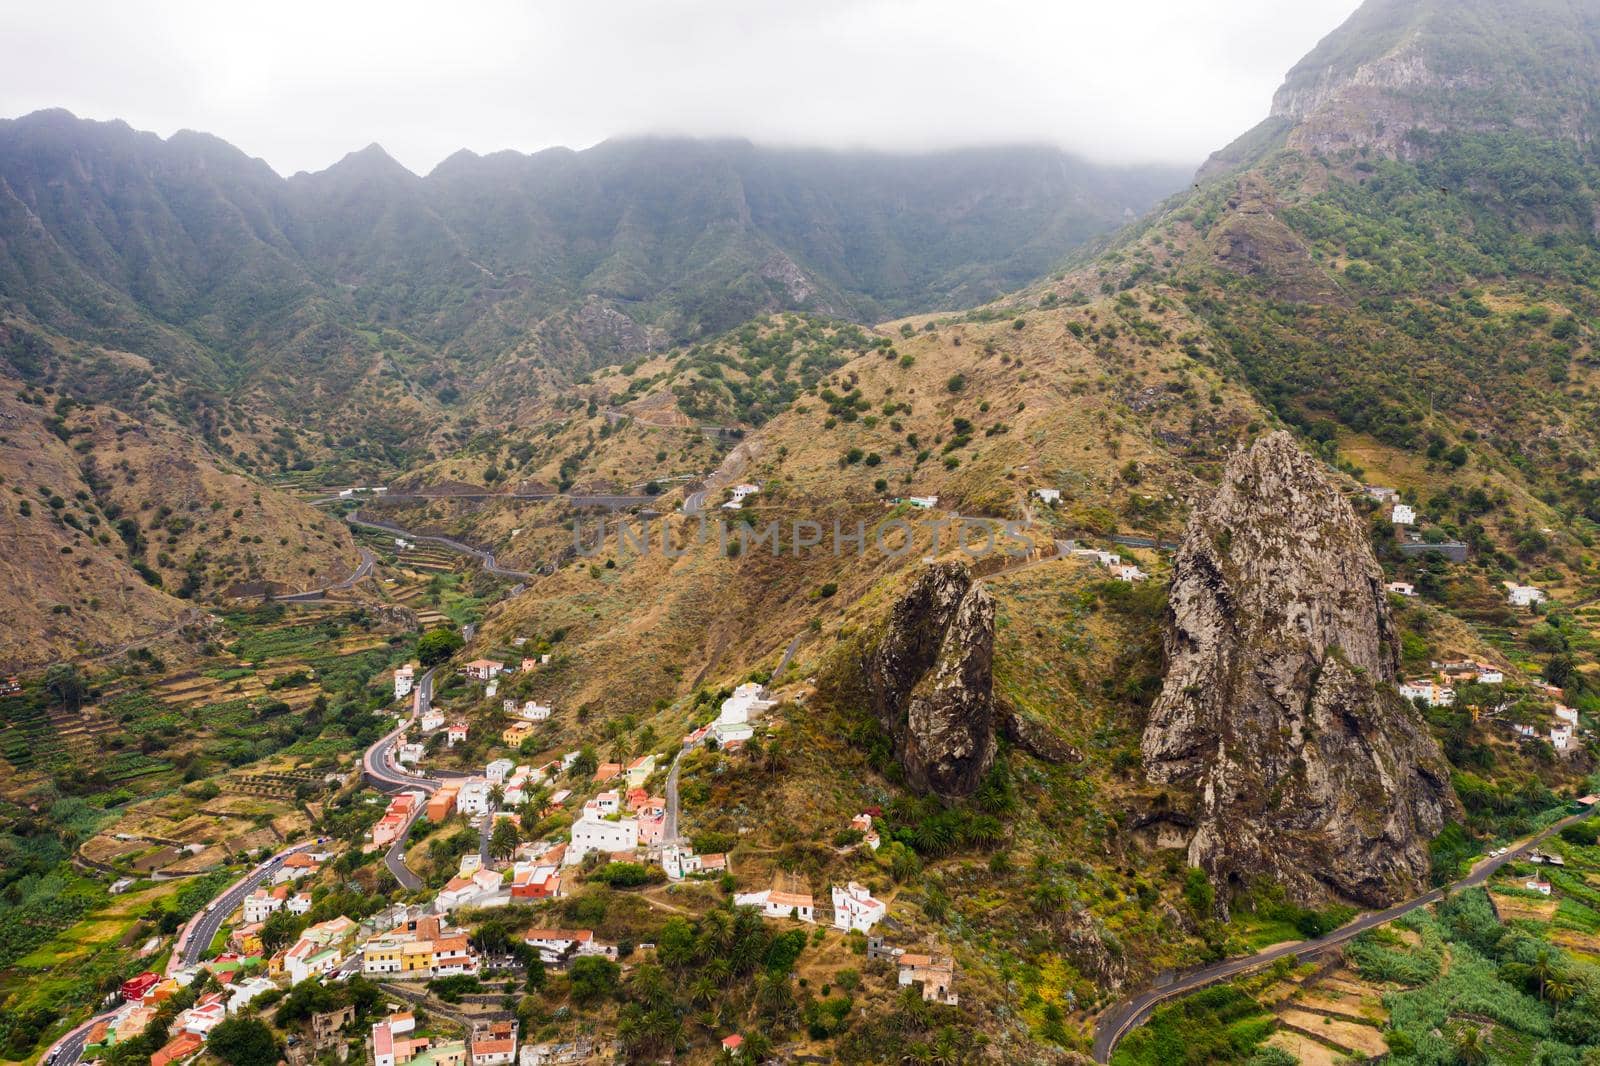 Panoramic view of the mountains on the island of La Gomera, Canary Islands, Spain.Beautiful landscape of the island of Gomera by Lobachad